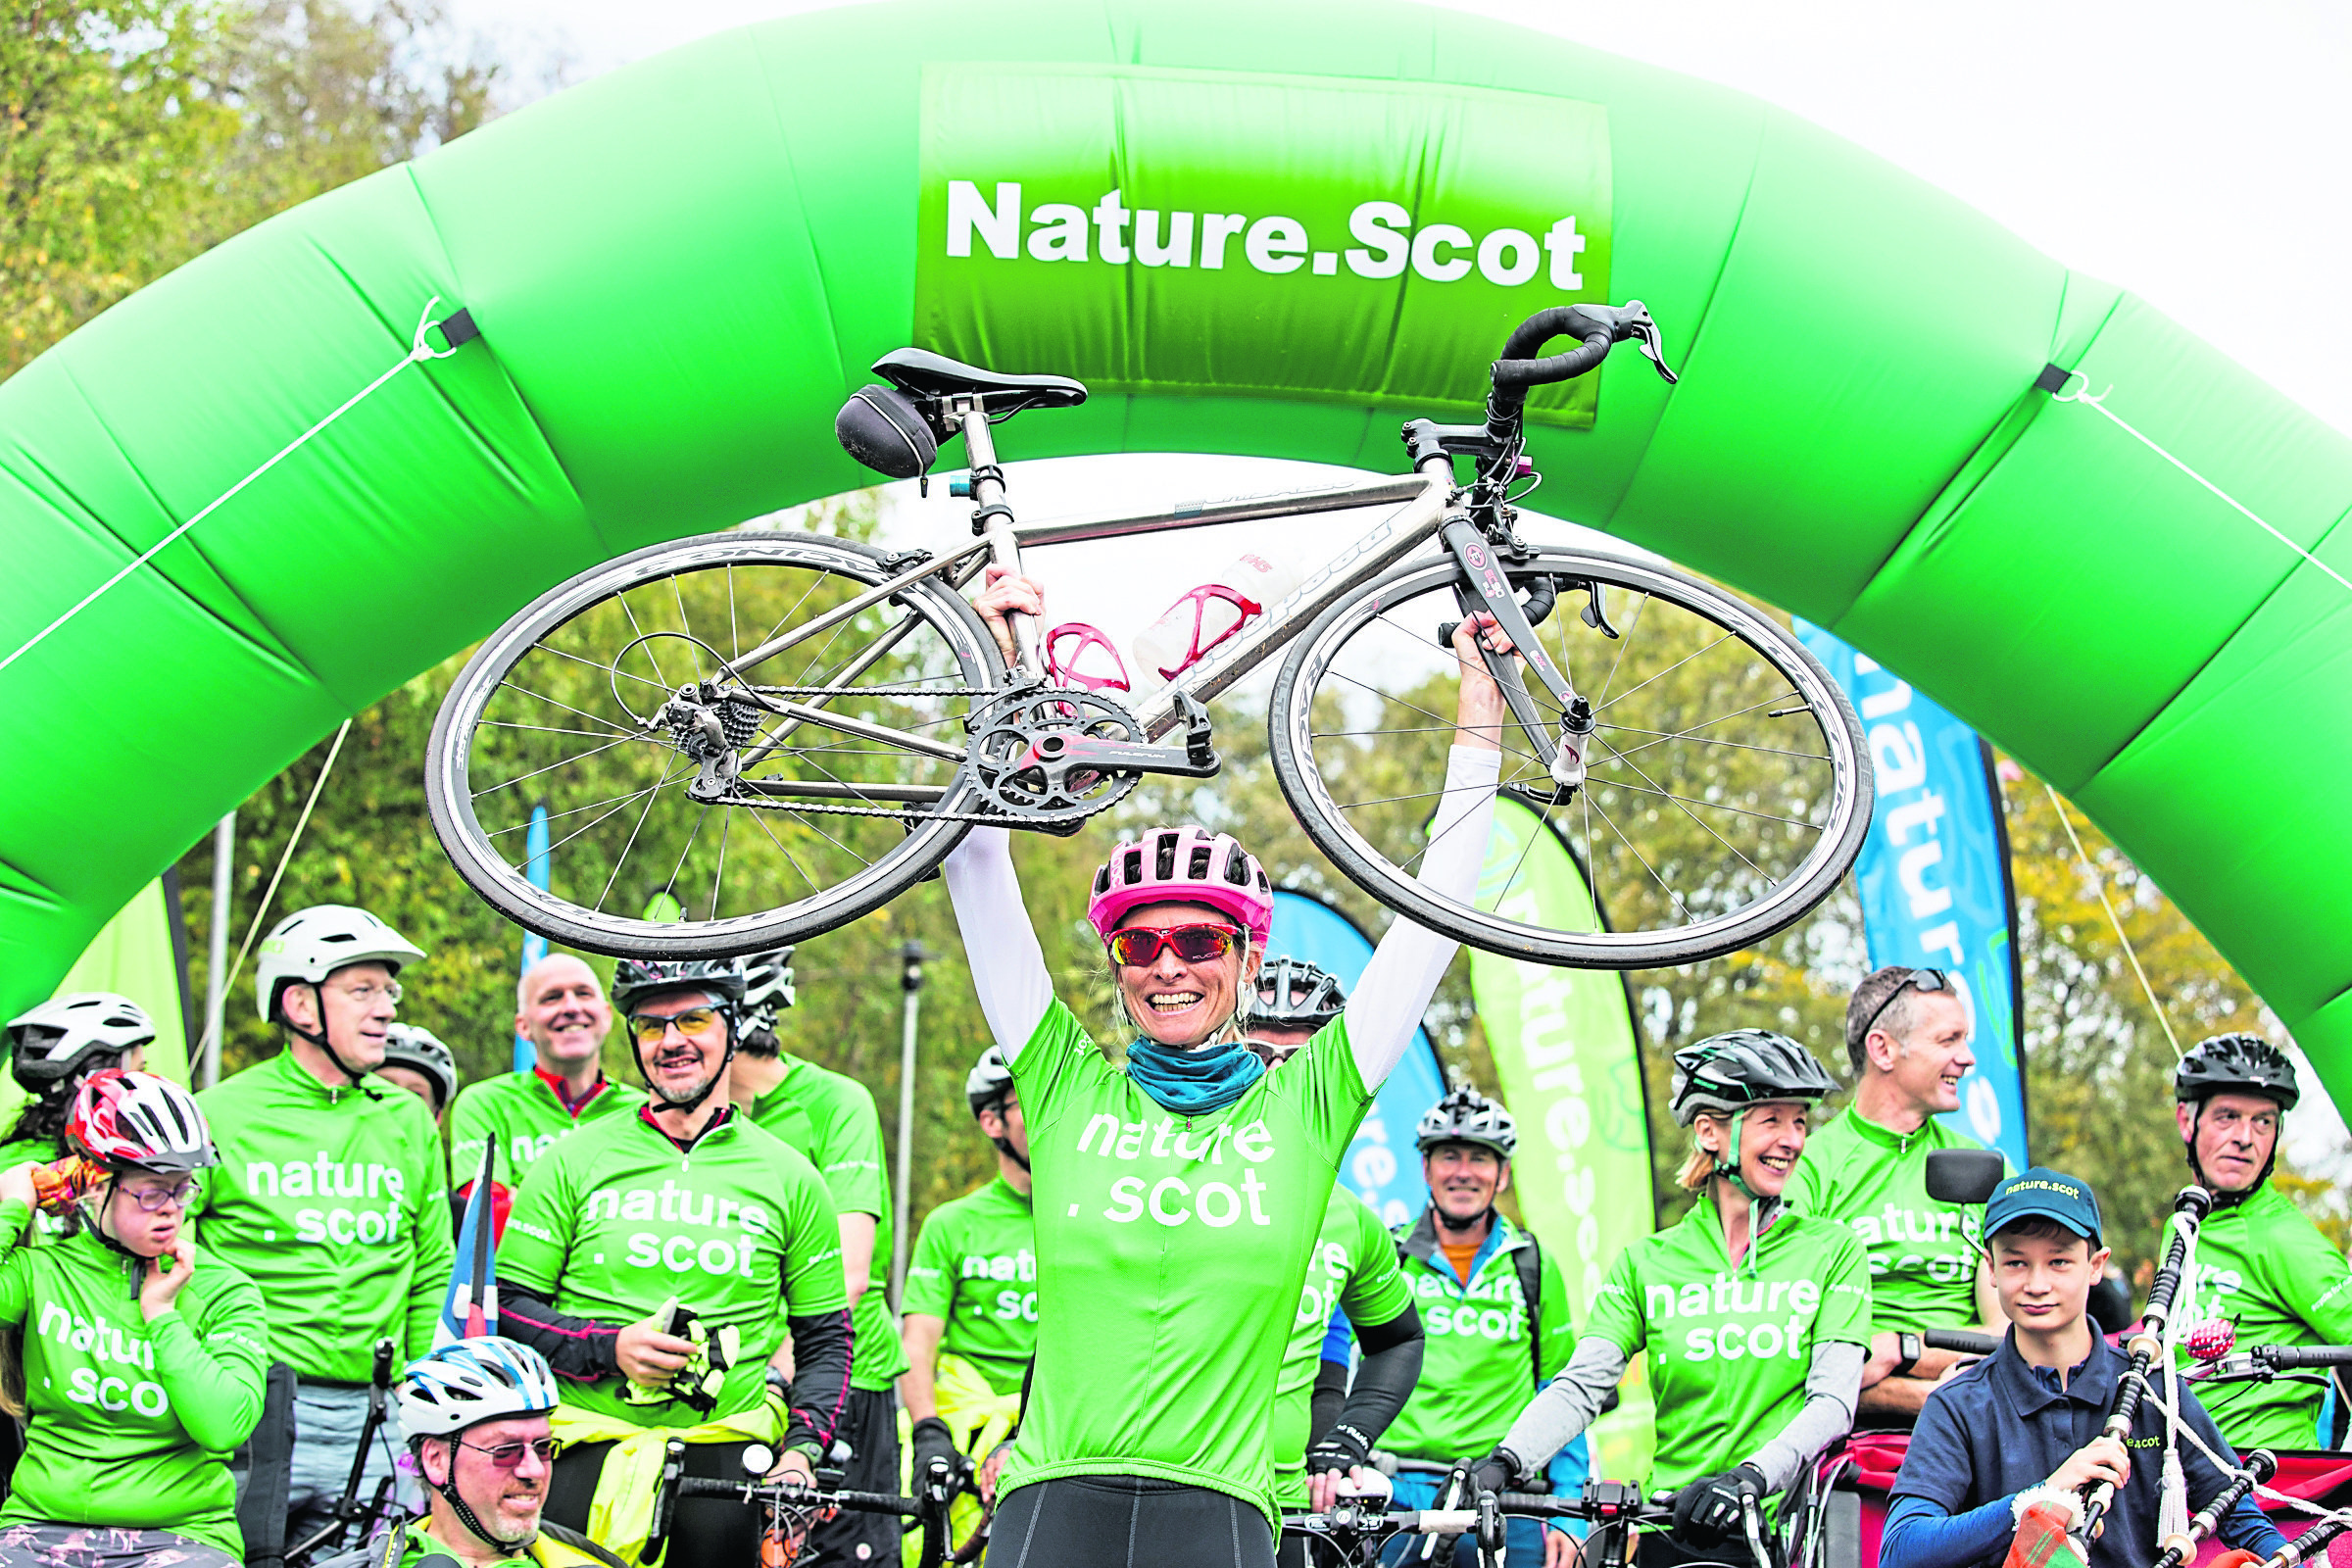 Scottish Natural Heritage, Chief Executive Francesca Osowska completes her epic 1,300 mile cycle.